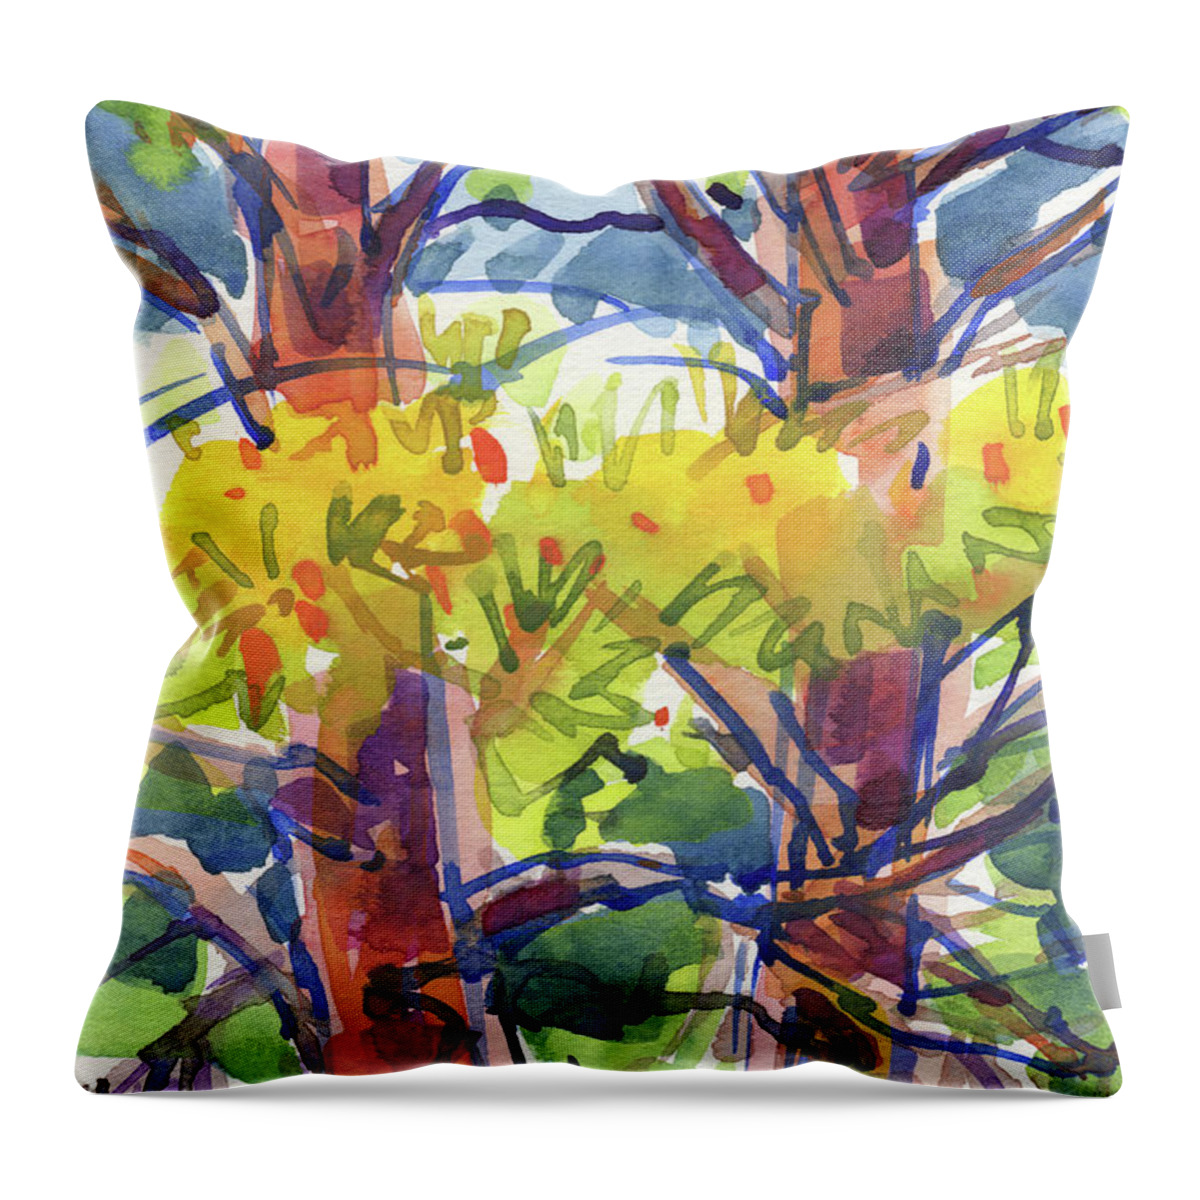 Landscape Throw Pillow featuring the painting Twins by Judith Kunzle